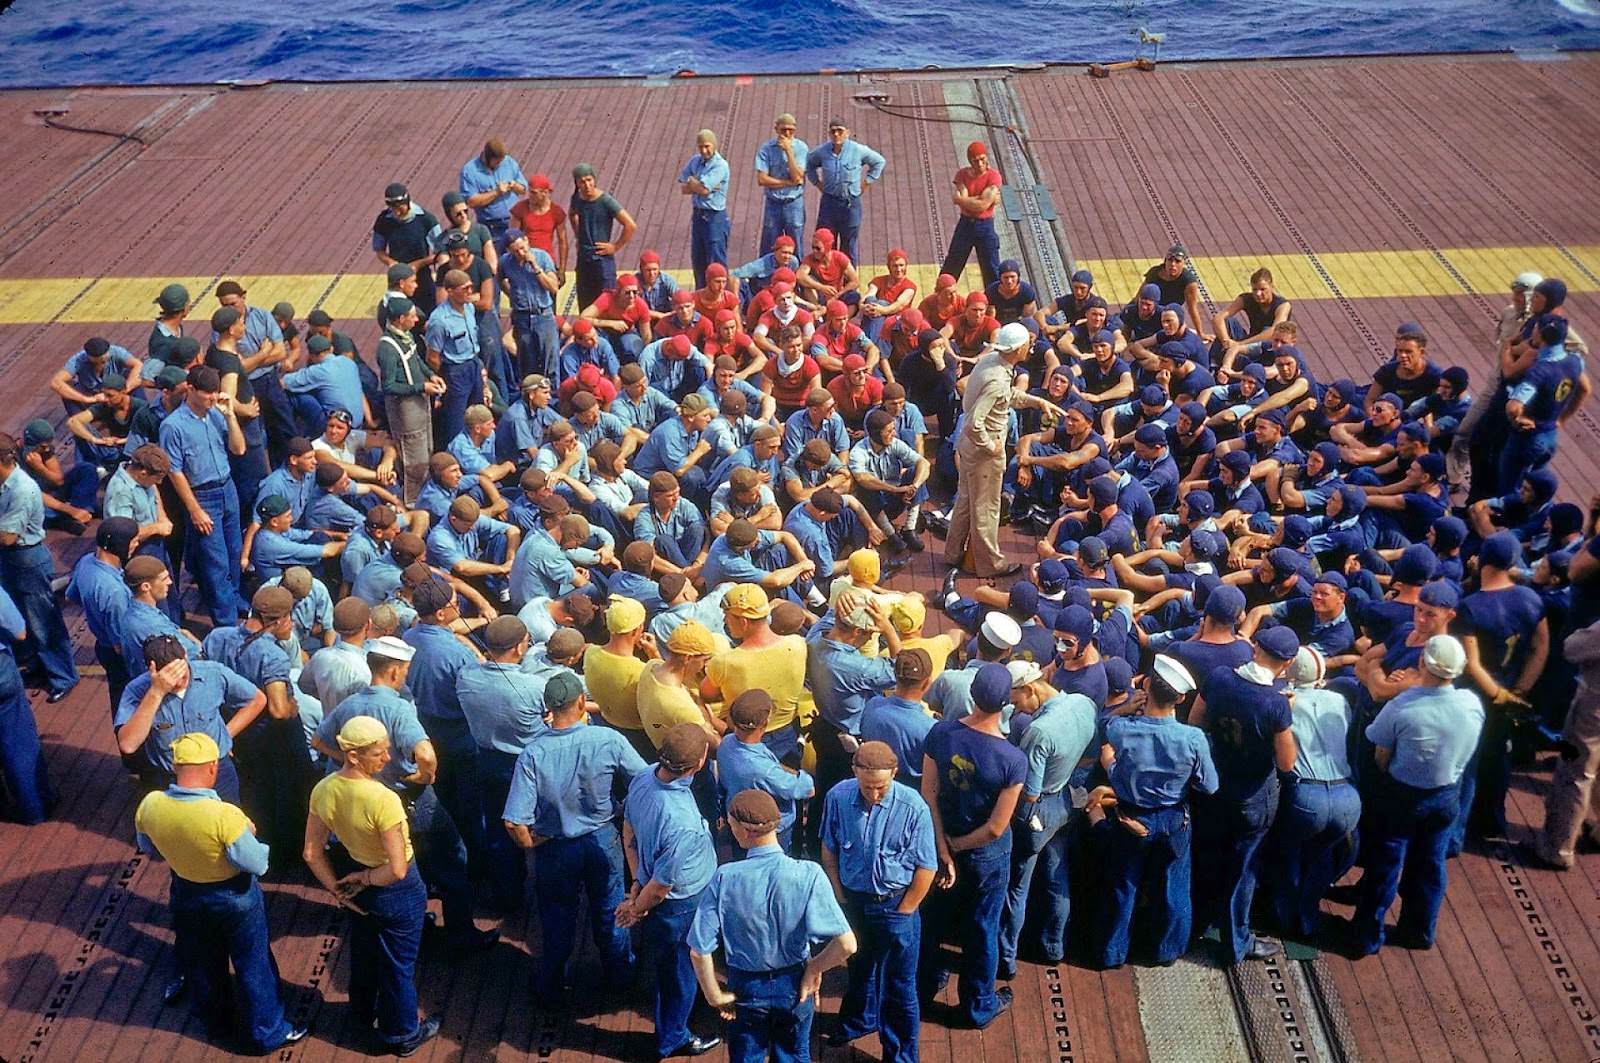 Crew aboard the aircraft carrier Enterprise CV-6 listening to instructions during the US Navy's Pacific Fleet maneuvers around Hawaii in 1940.